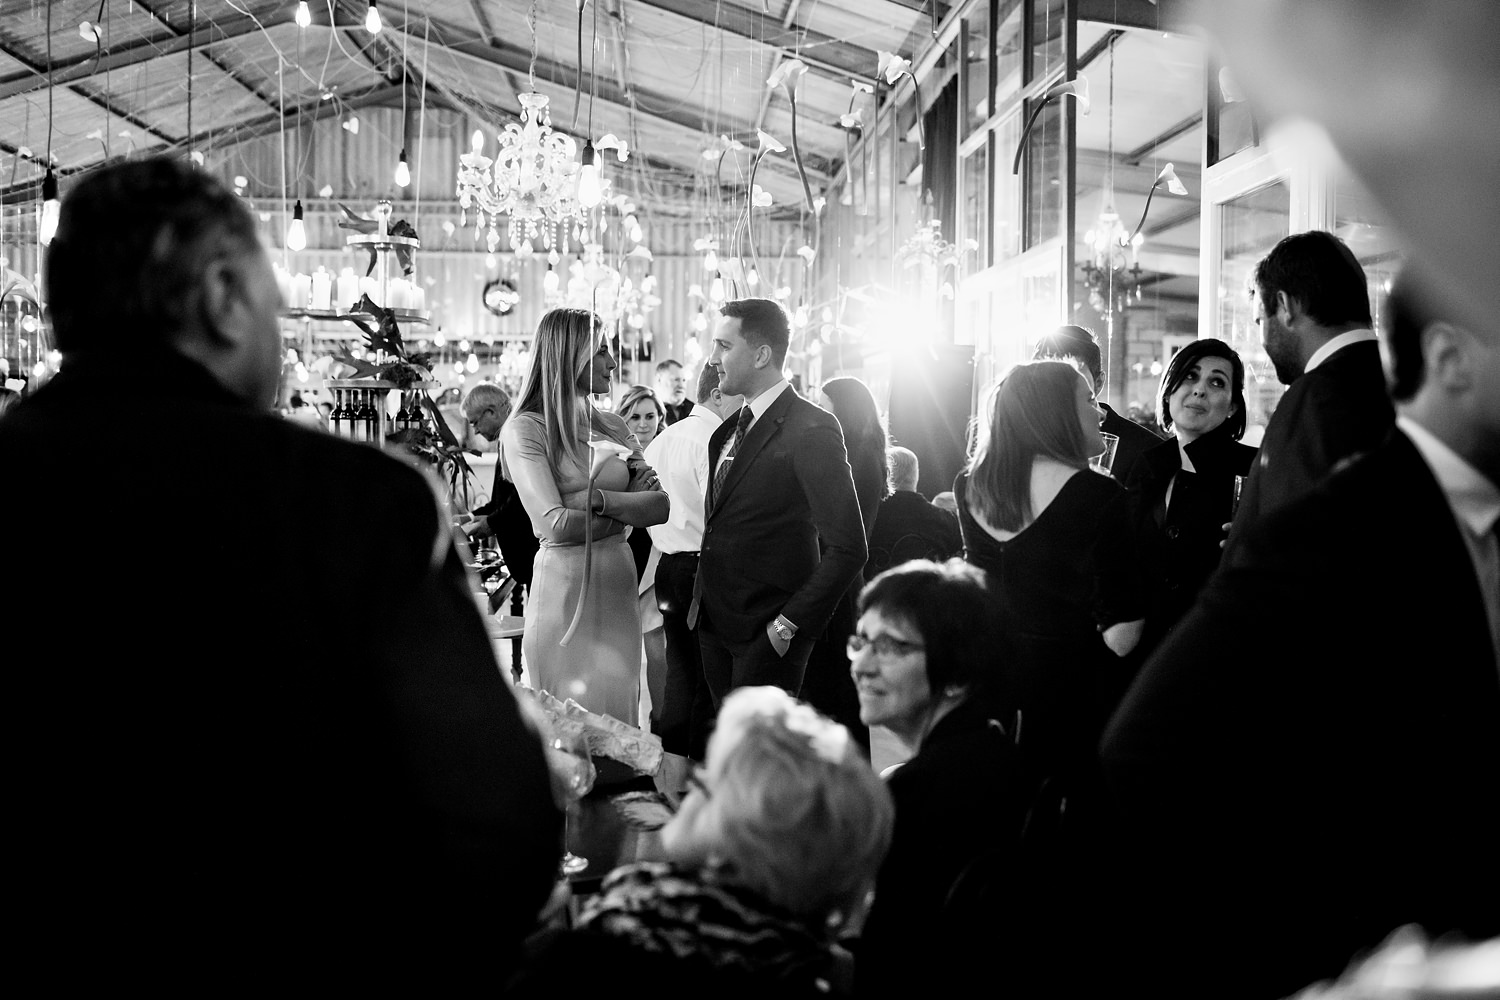 Documentary wedding photography scenes as guests mingle between courses at The Rose Barn wedding reception in Jeffrey's Bay